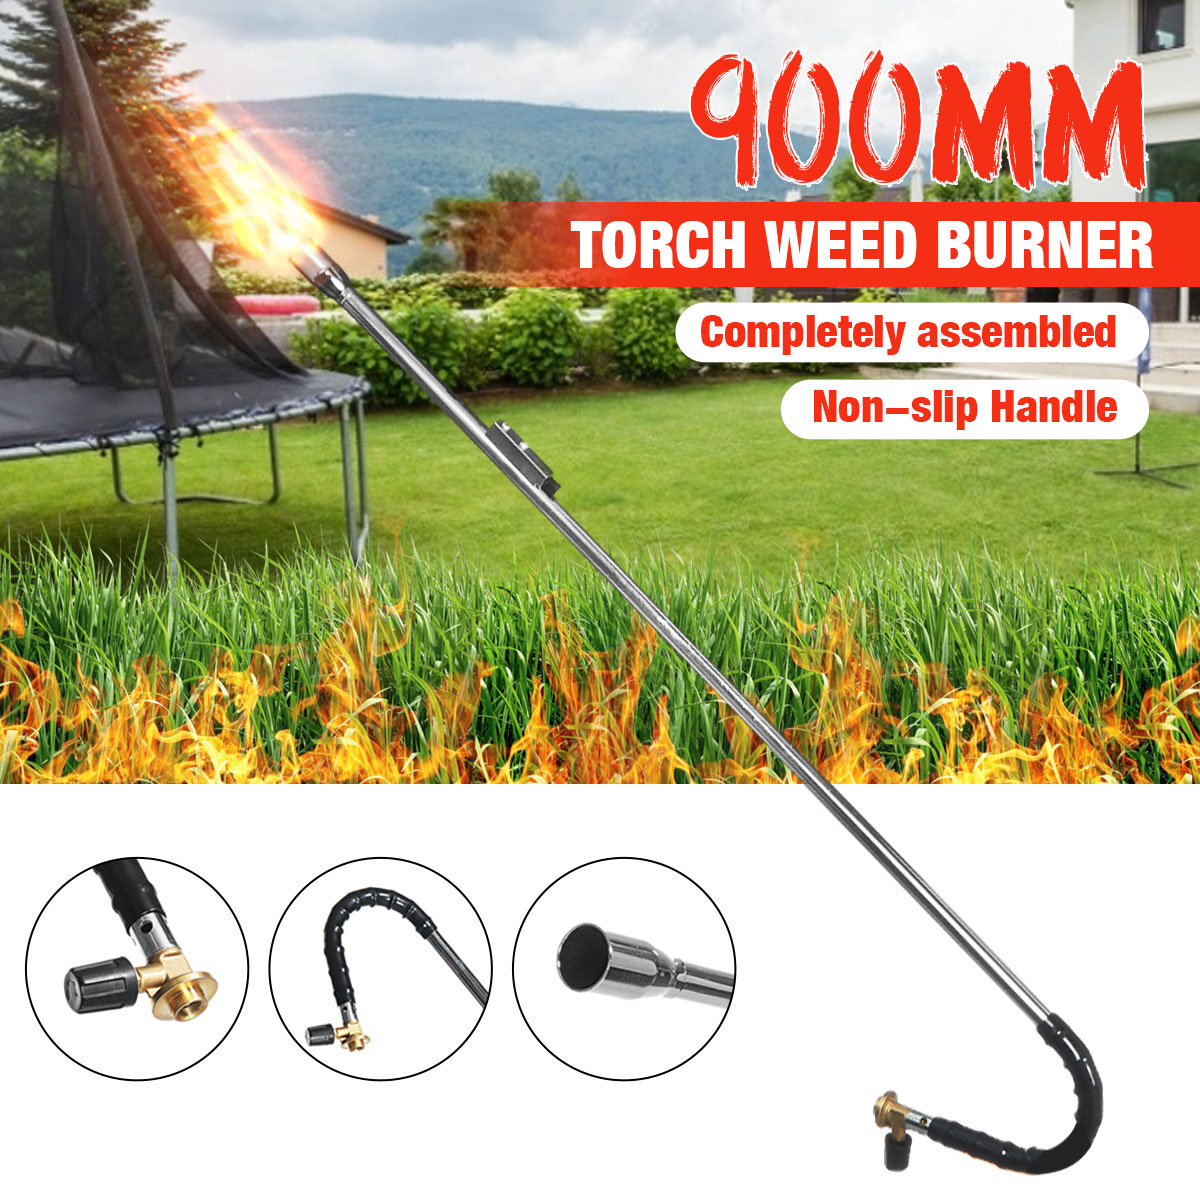 Torch-Weed-Burner-Weed-Wand-Butane-Gas-Canisters-Blowtorch-Garden-Torch-Weeds-Killer-Burner-Pest-1762993-1